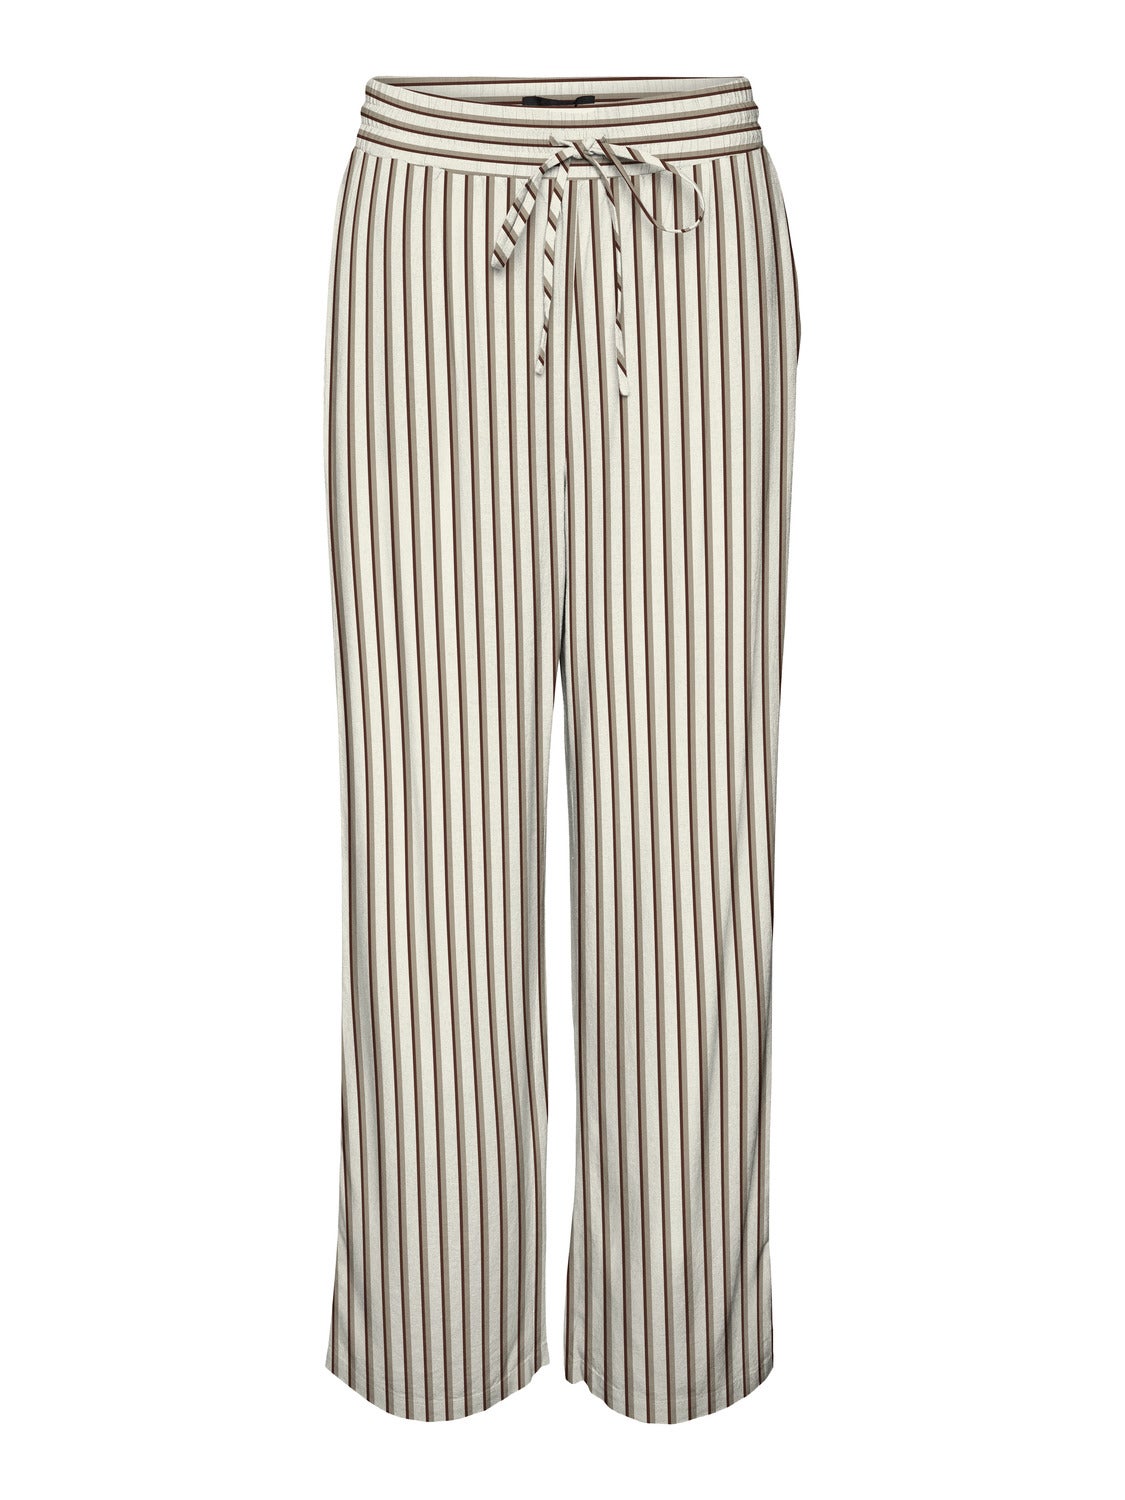 blue and white primark striped trousers | Vinted